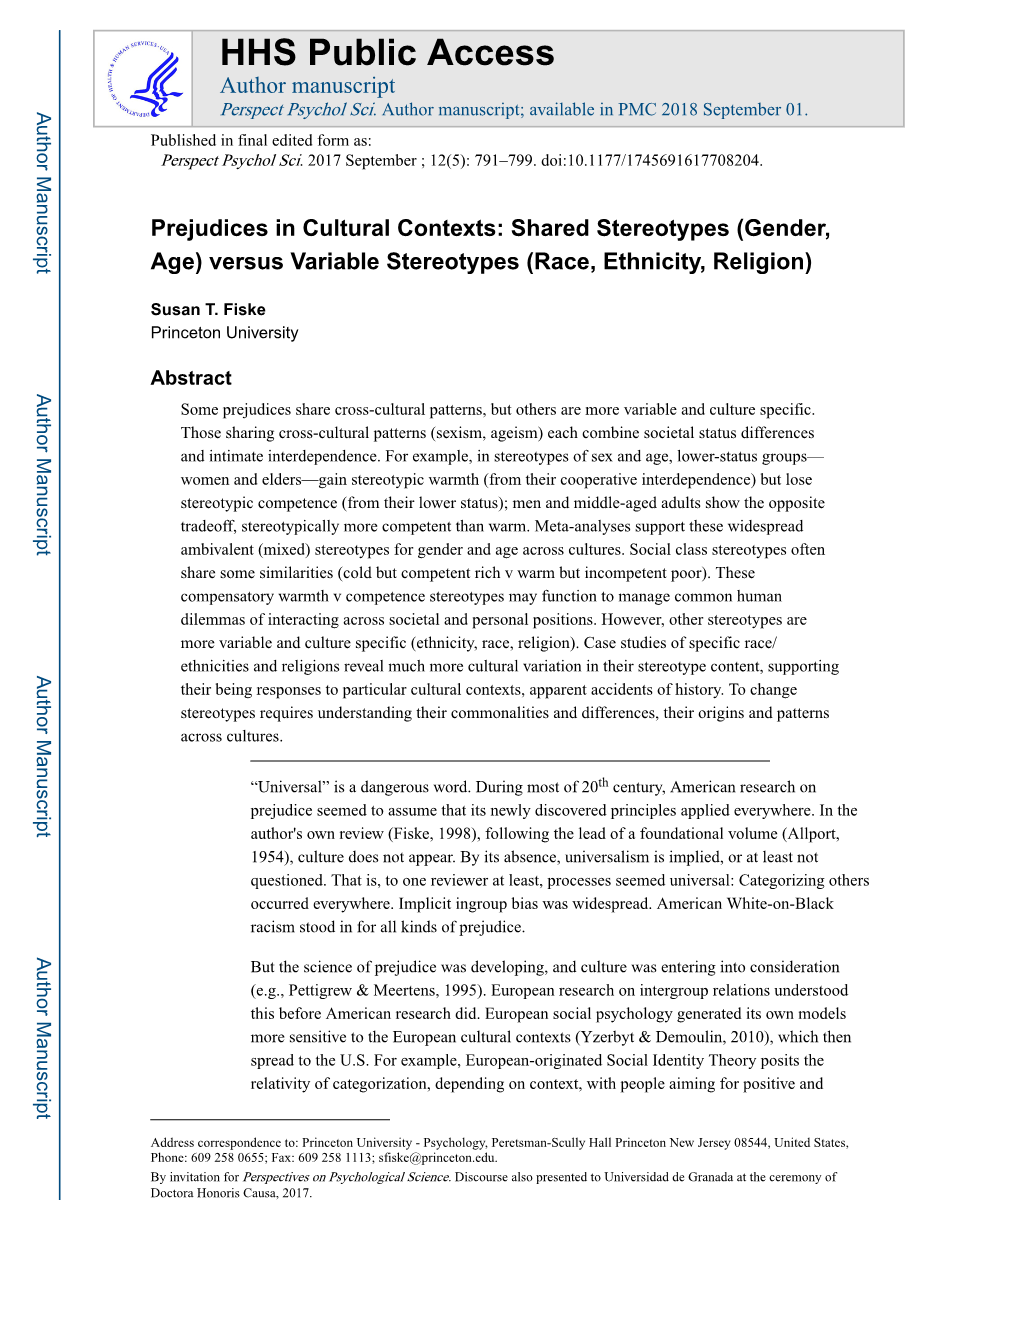 Prejudices in Cultural Contexts: Shared Stereotypes (Gender, Age) Versus Variable Stereotypes (Race, Ethnicity, Religion)